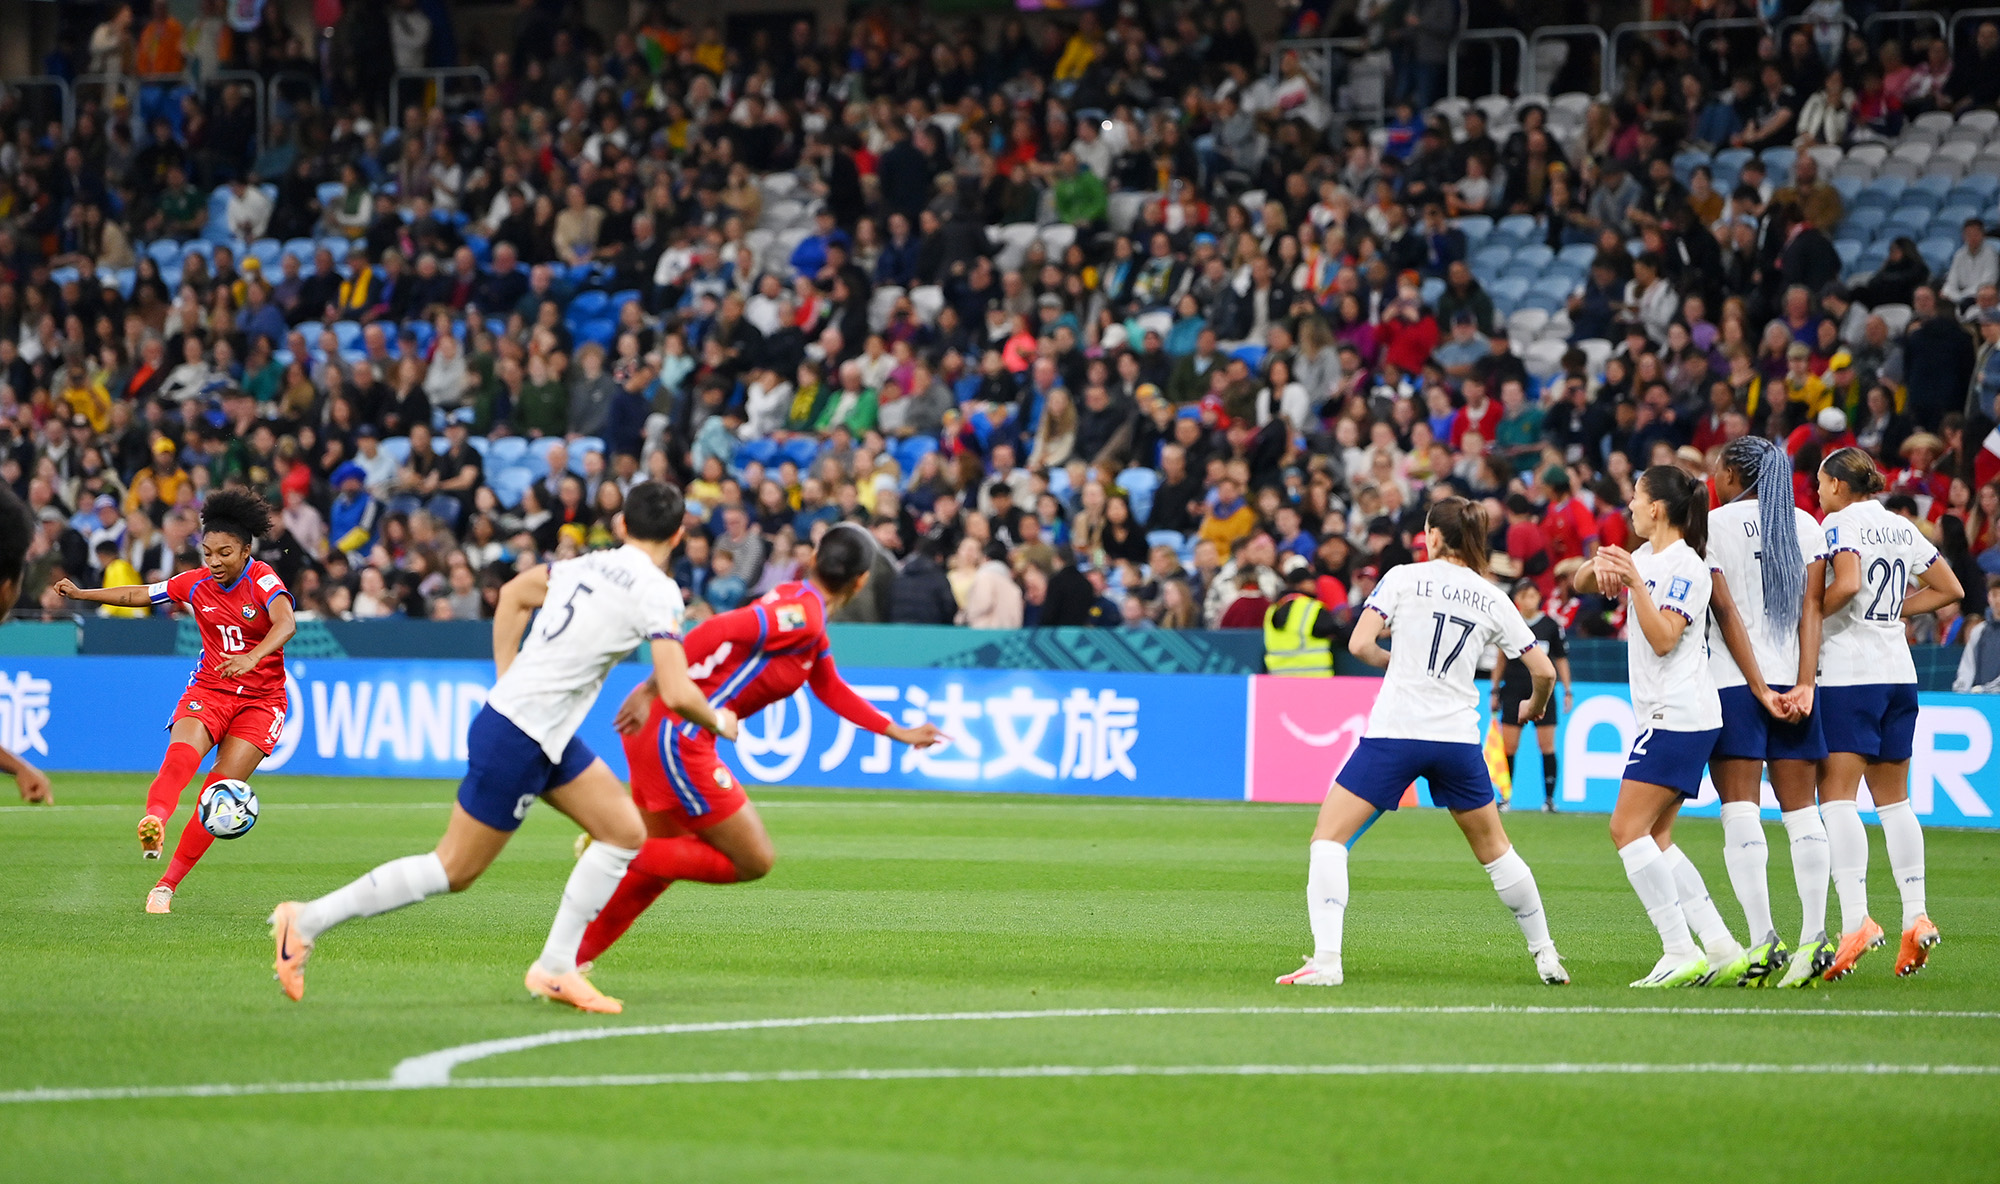 Marta Cox of Panama scores her team's first goal during the FIFA Women's World Cup Australia & New Zealand 2023 Group F match between Panama and France at Sydney Football Stadium on August 2, in Sydney, Australia. 